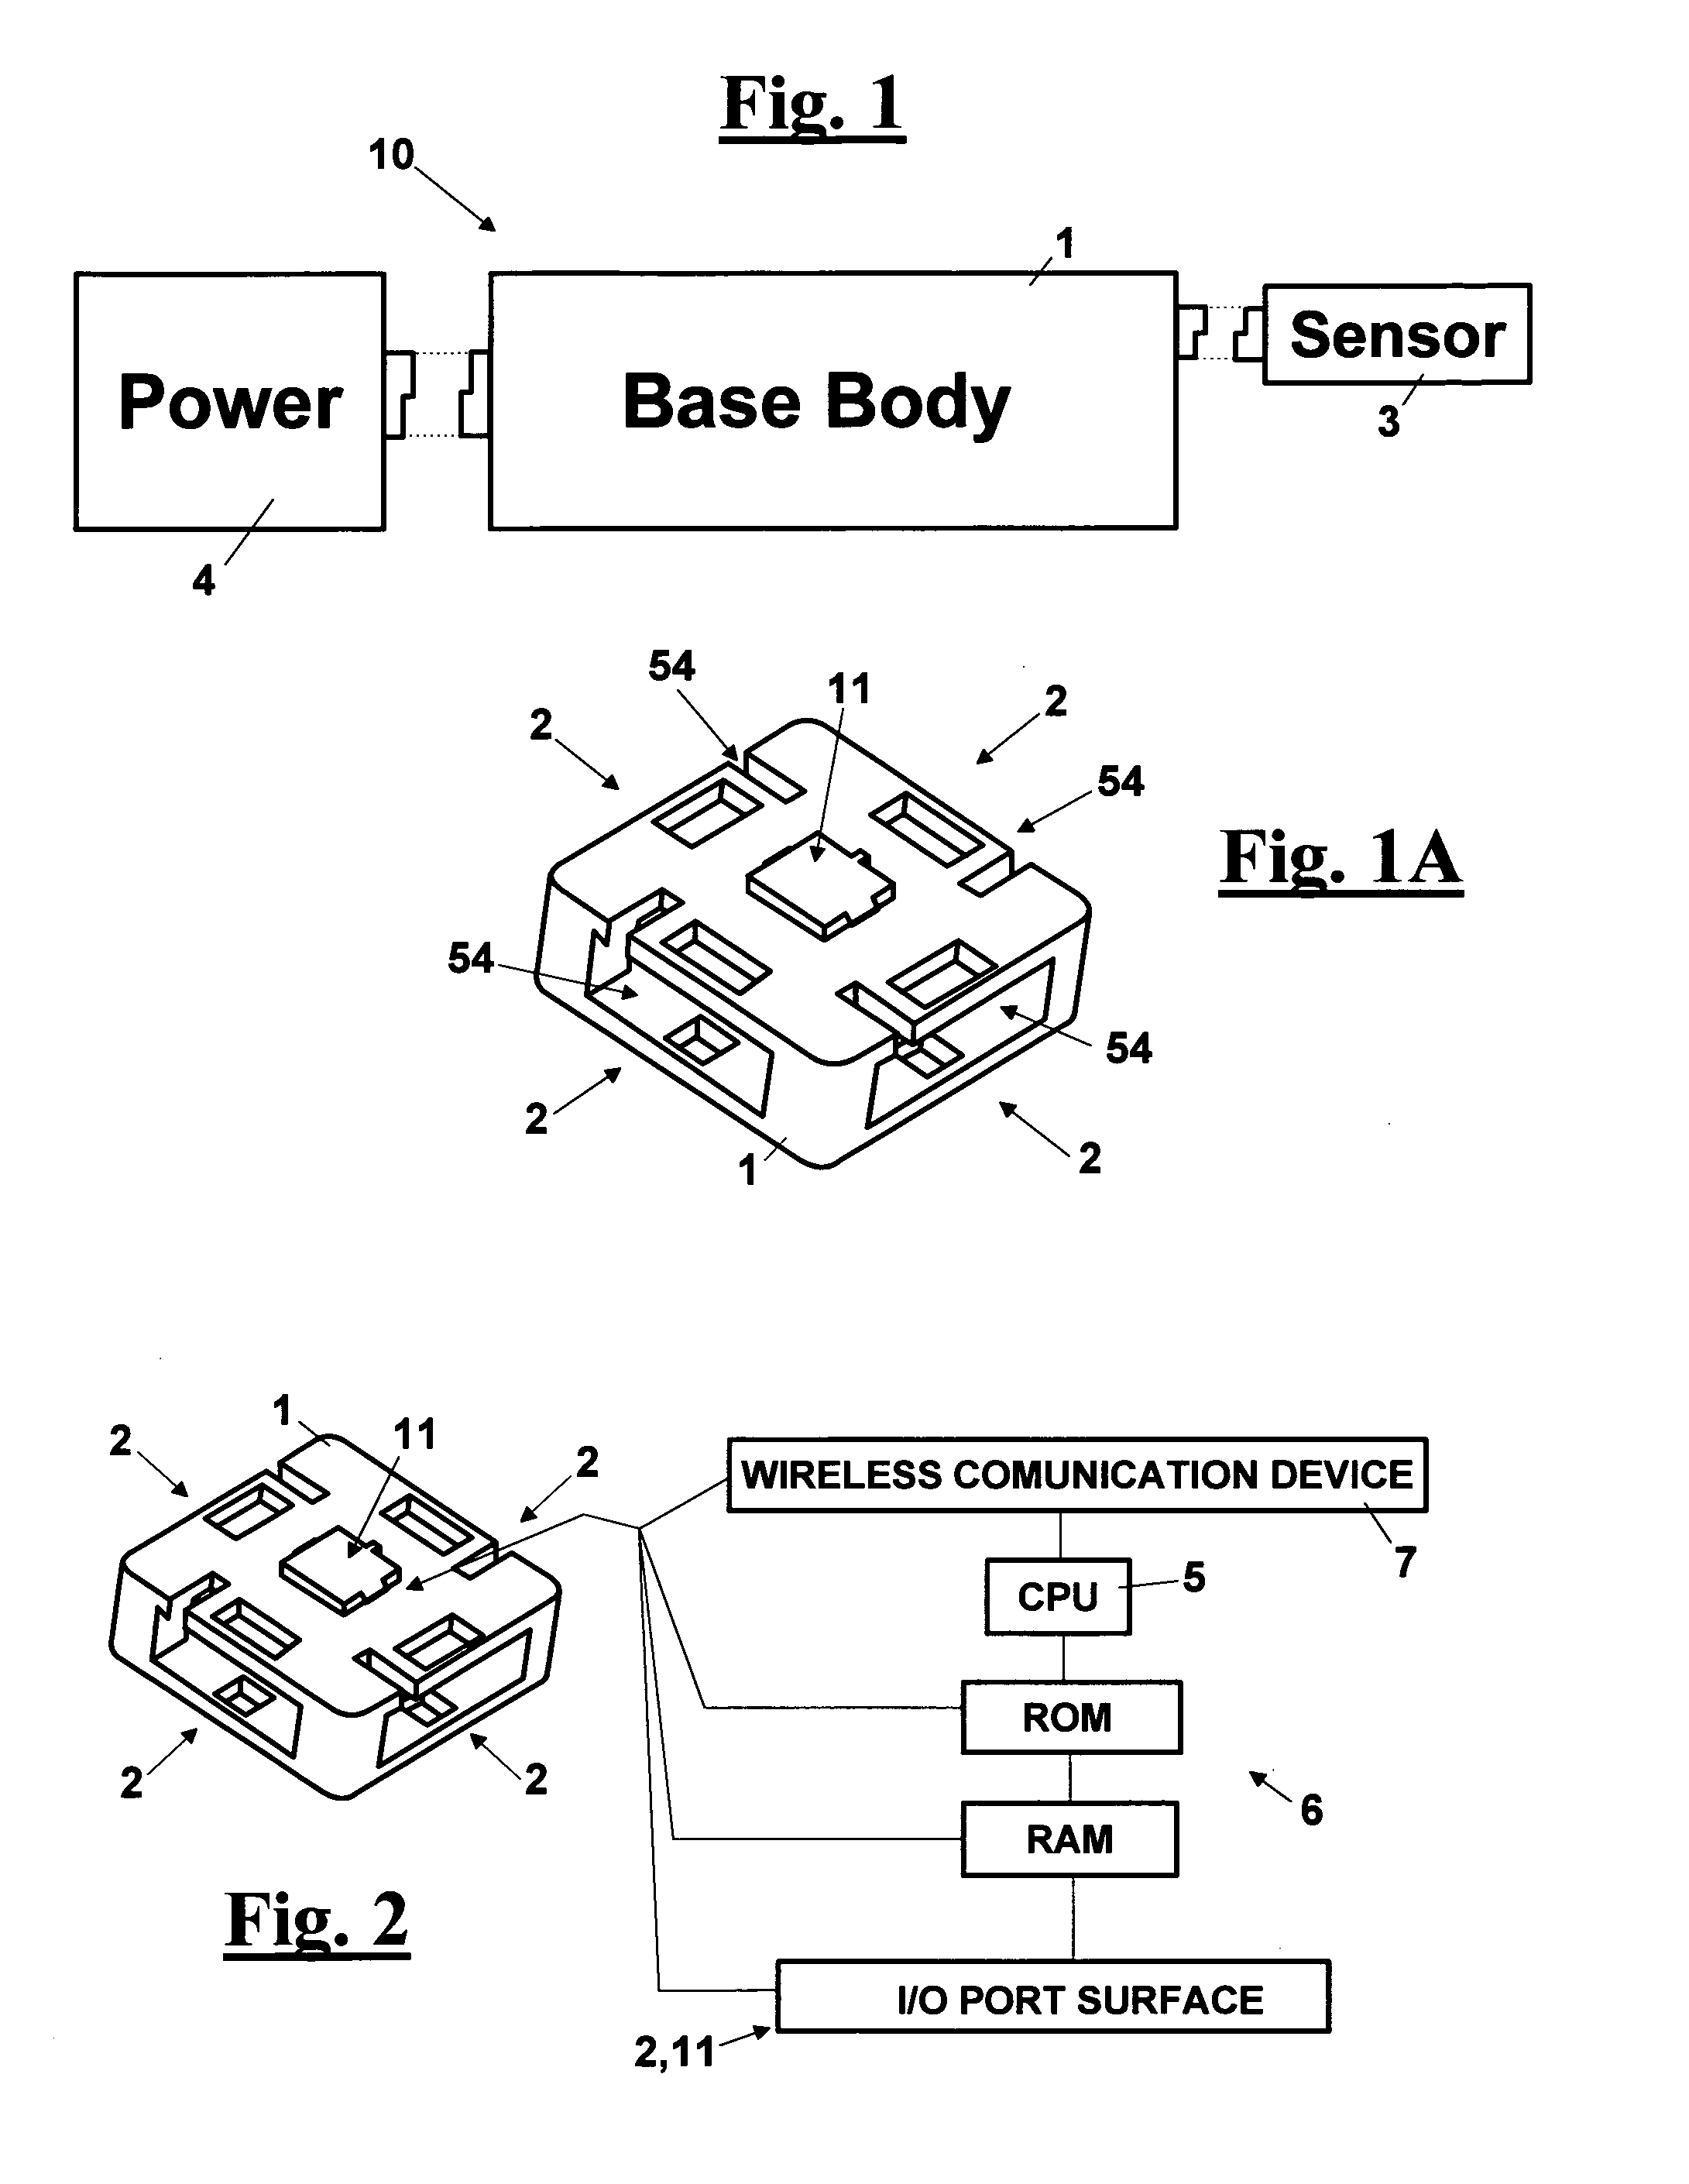 Support device for sensors and/or actuators that can be part of a wireless network of sensors/actuators